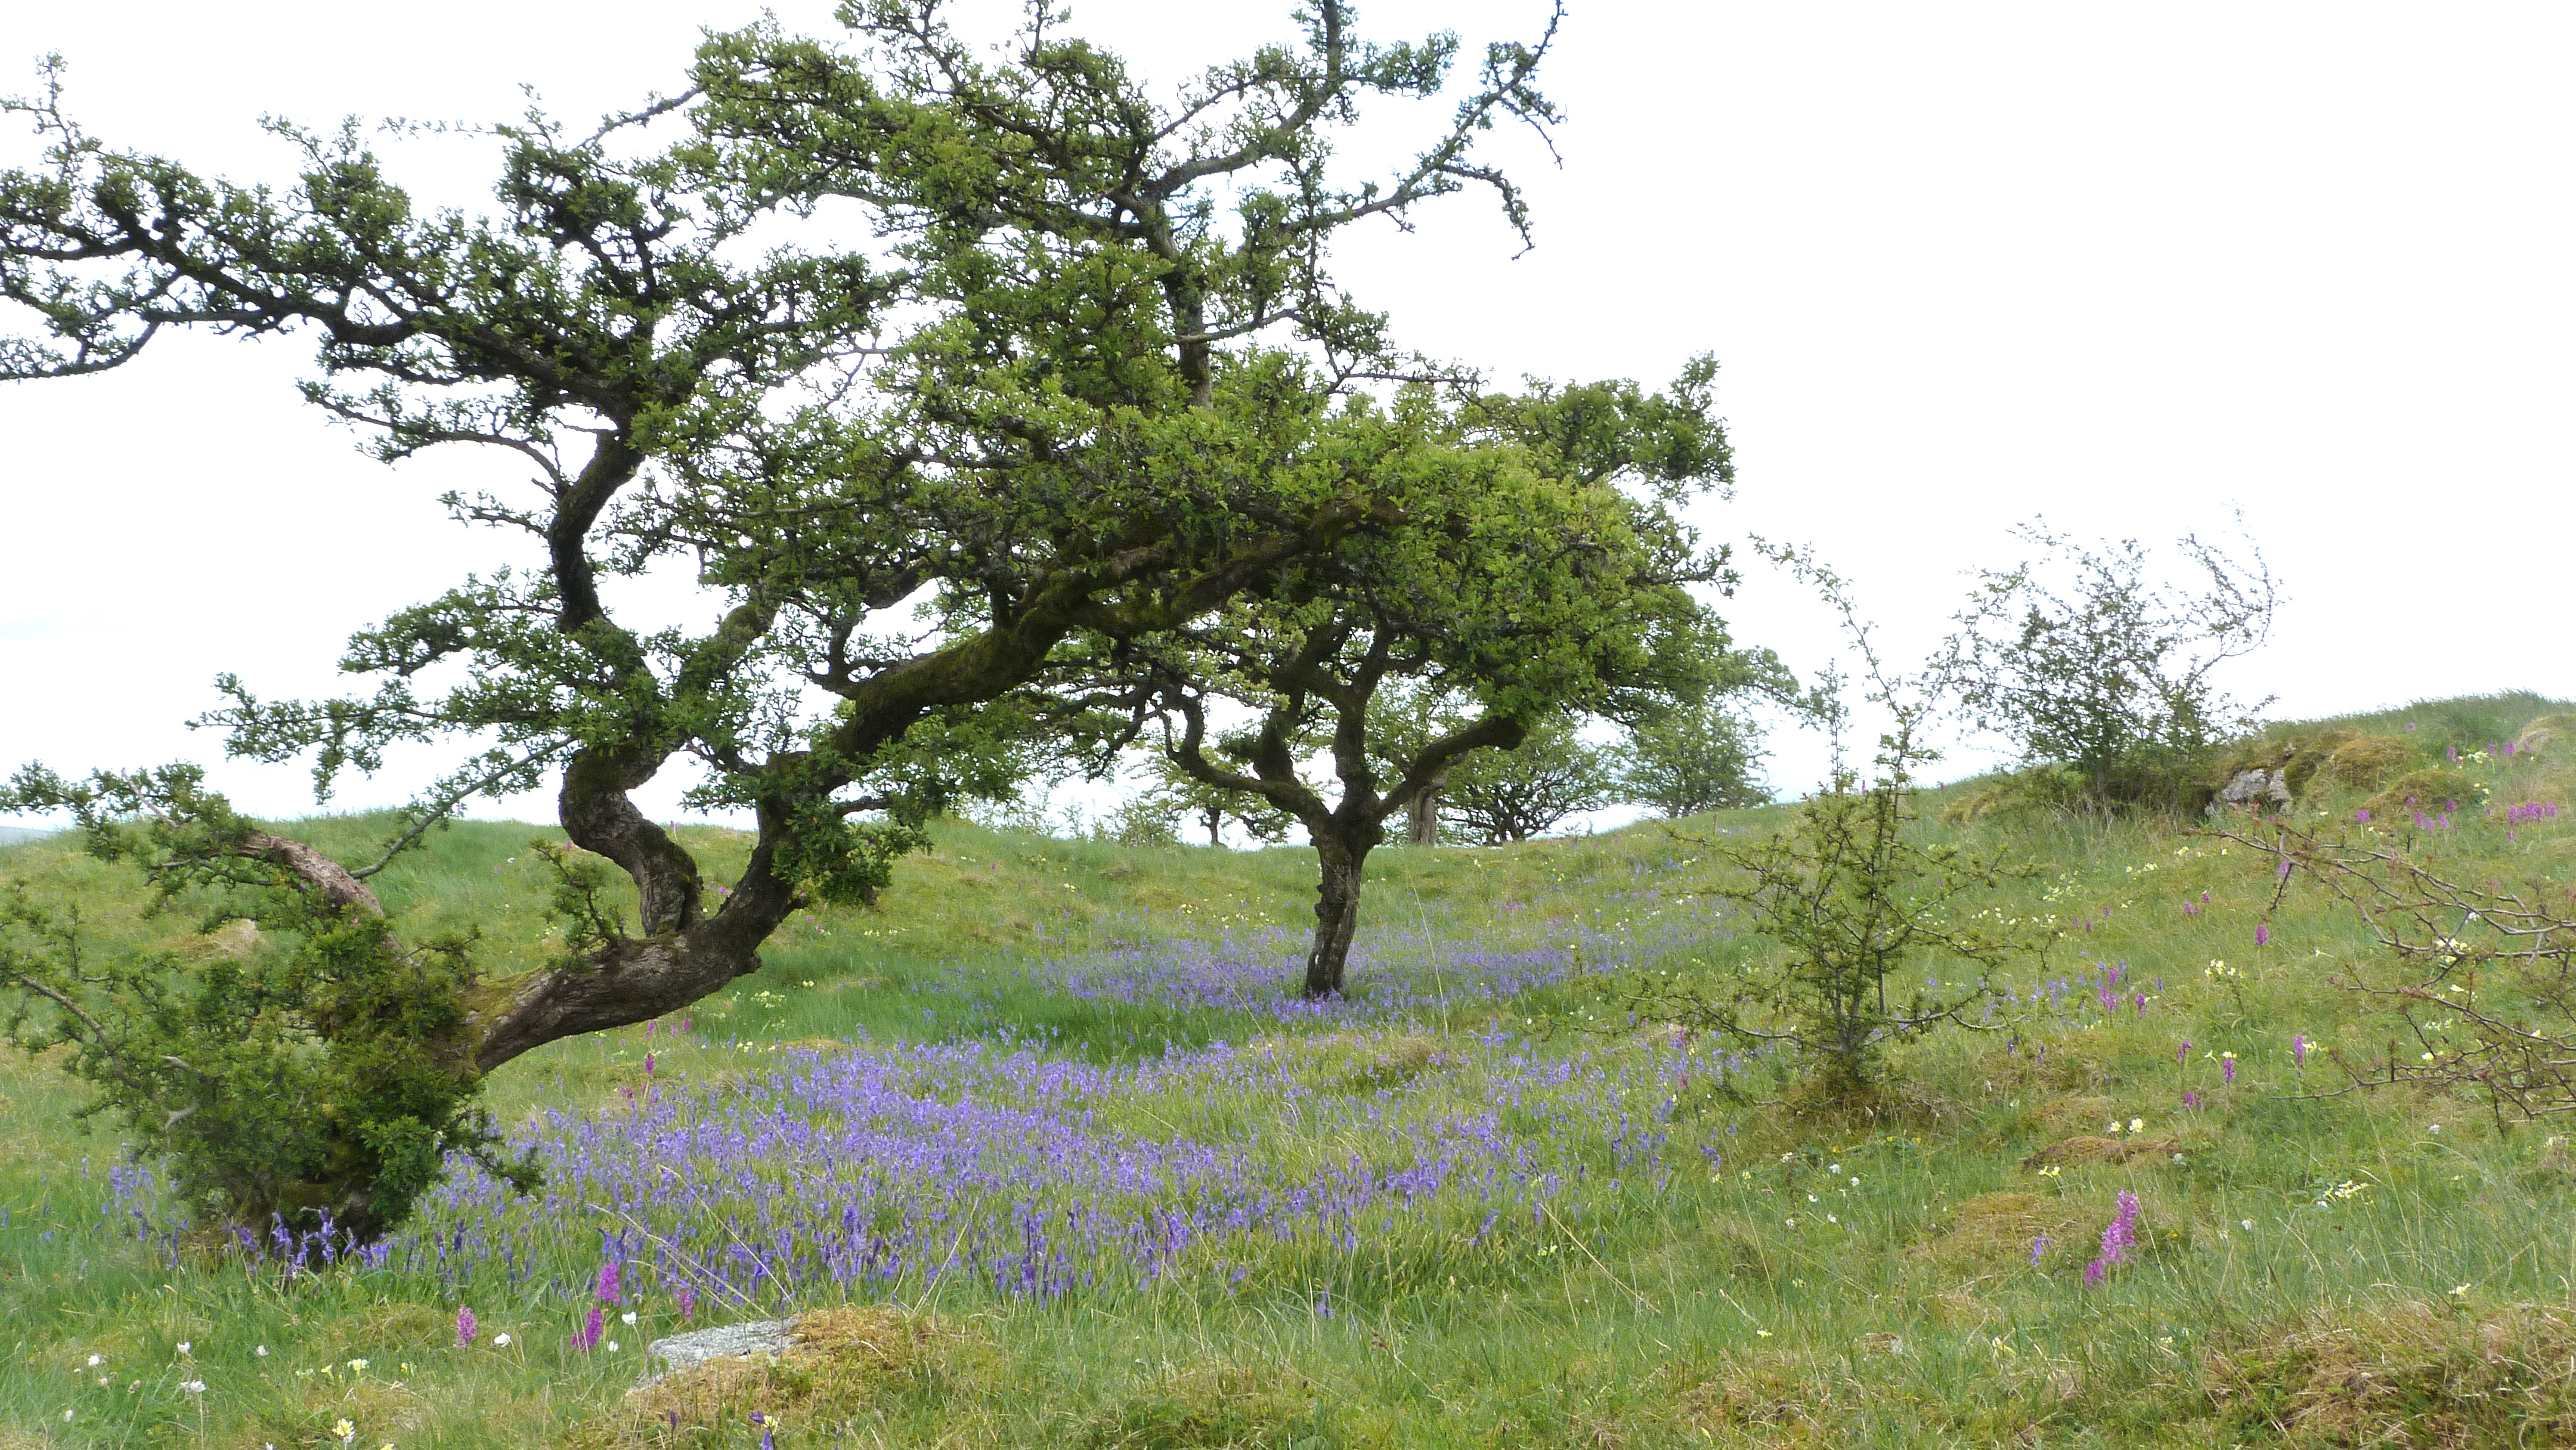 Bluebells on Brae Pasture, 16 May '23